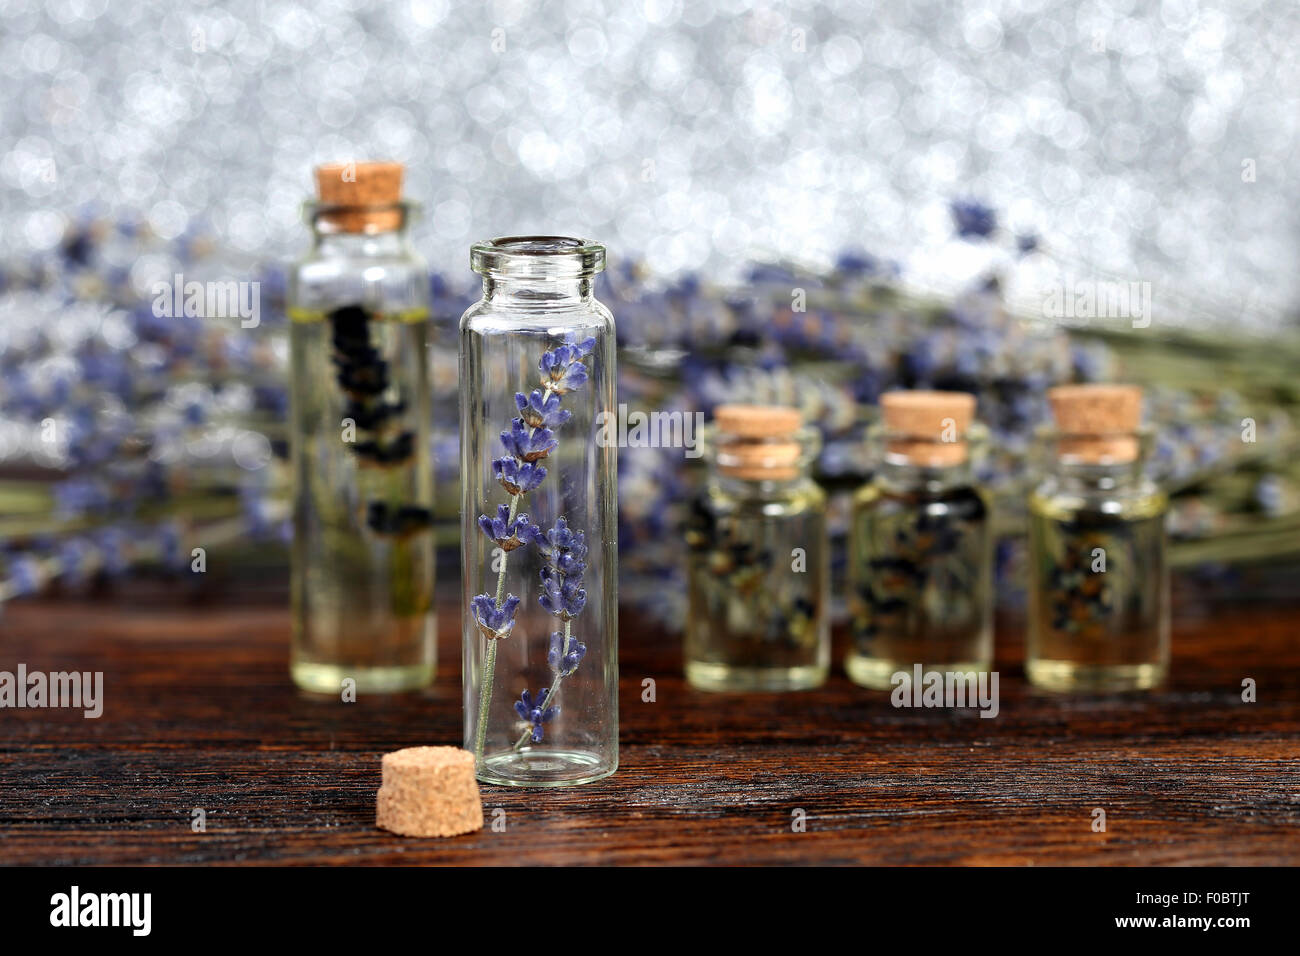 Lavender oil in a glass bottle on a wooden table Stock Photo